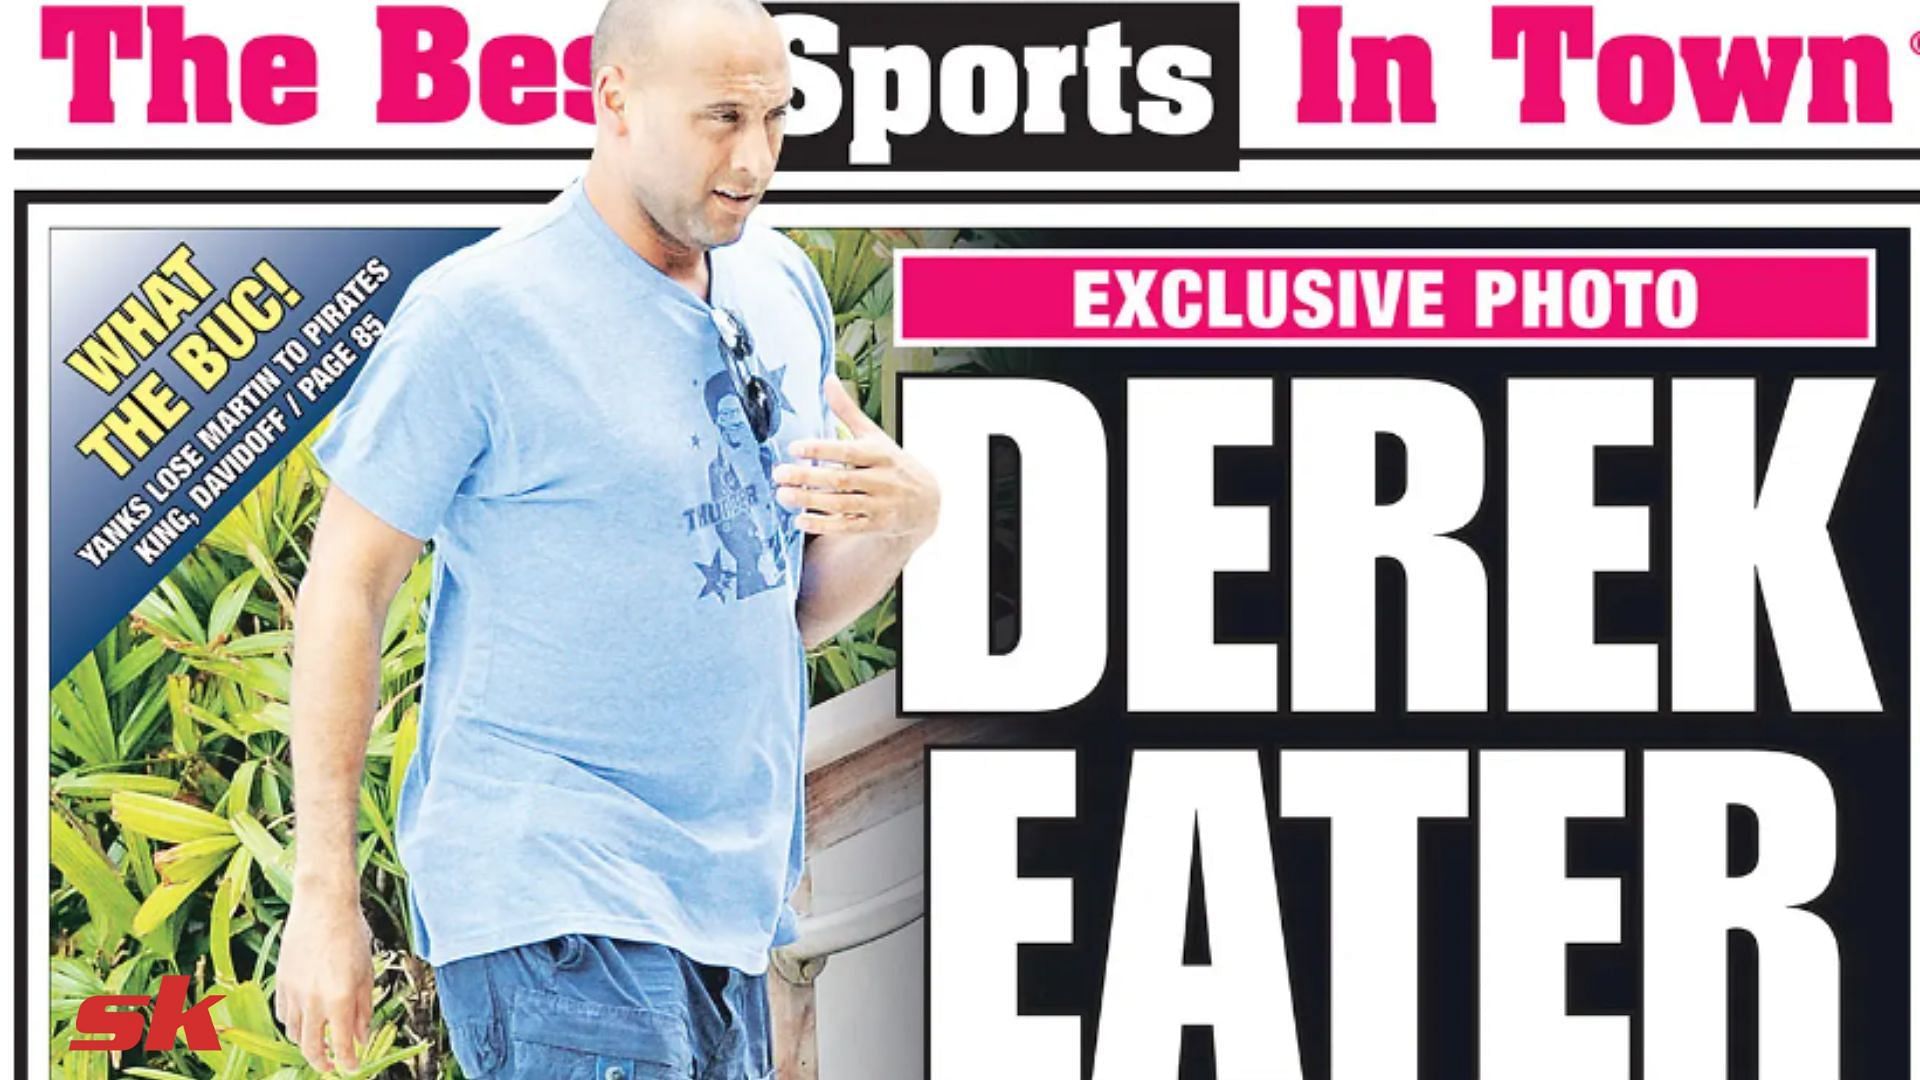 Derek Jeter was mocked by the NY Post in 2012 after his ankle surgery [Credits: NY Post]